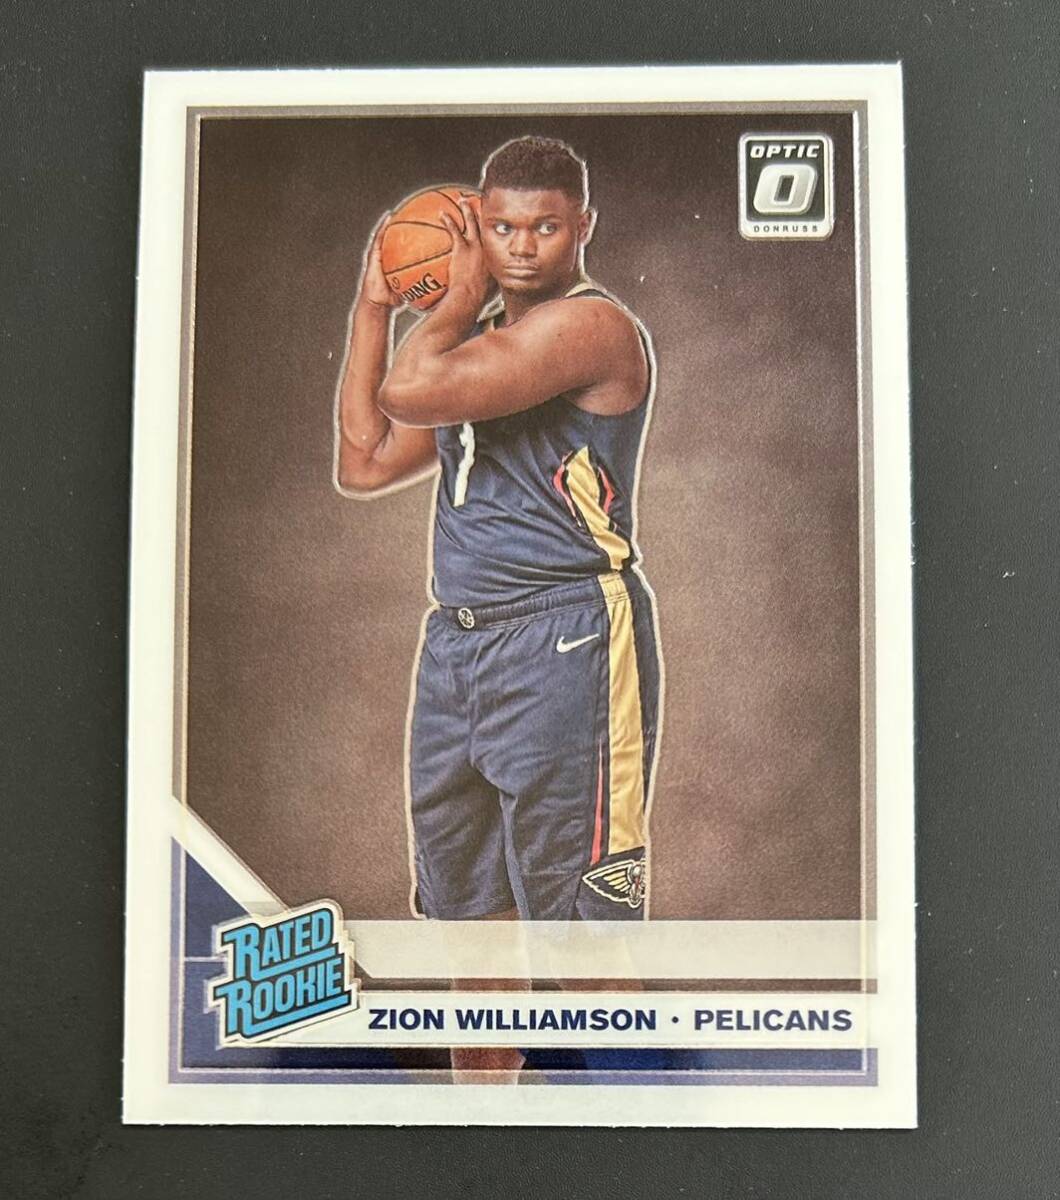 2019-20 Donruss Optic Zion Williamson Pelicans RC Rated Rookie #158 NBA Basketballの画像1